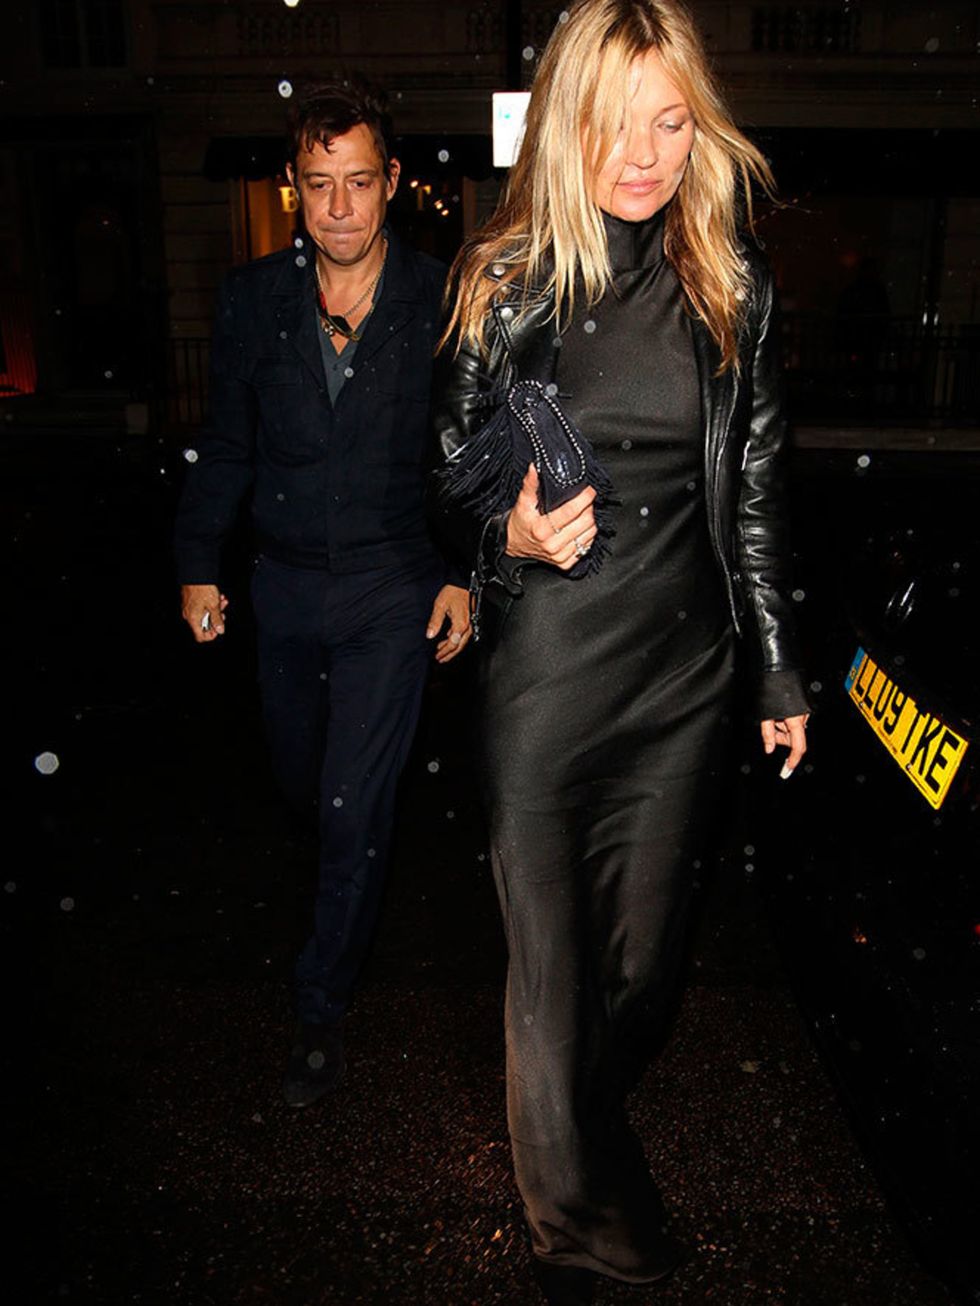 Kate Moss and Jamie Hince arrive for the Maison Martin Margiela Couture Spring 2015 show in London, January 2015.